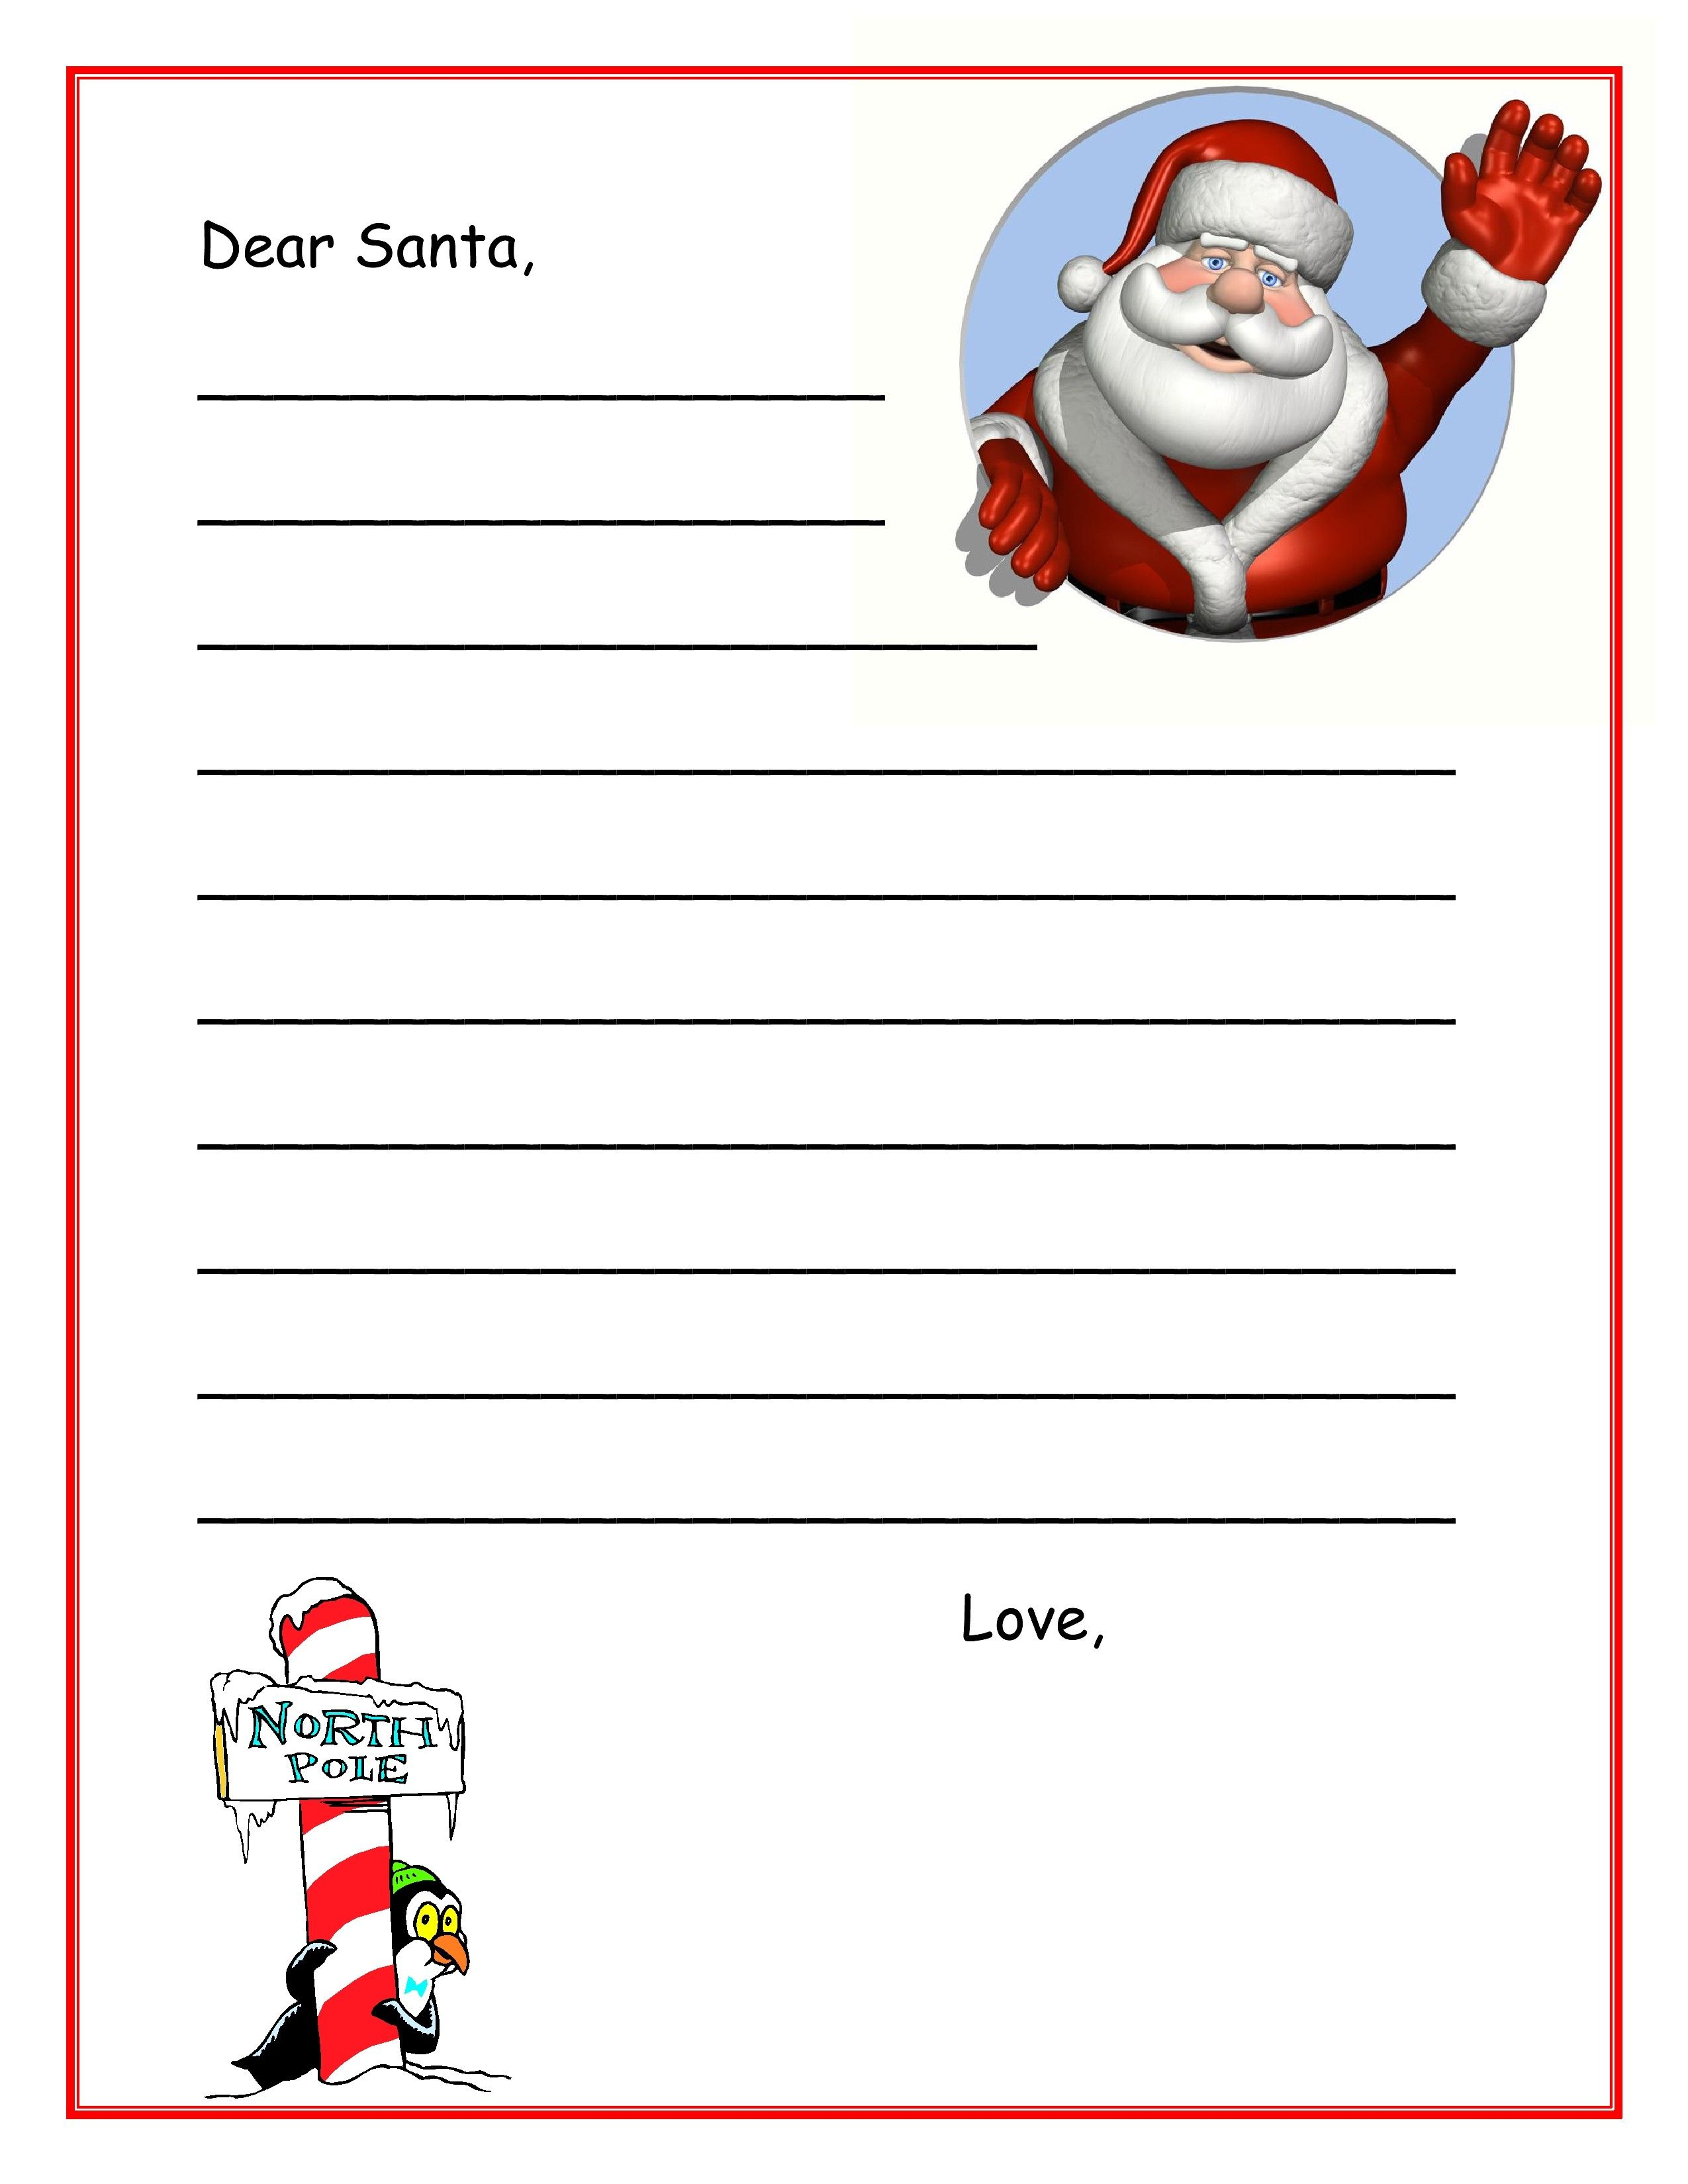 Free Dear Santa Letter Template Download | Posters For The Walls - Free Printable Dear Santa Stationary